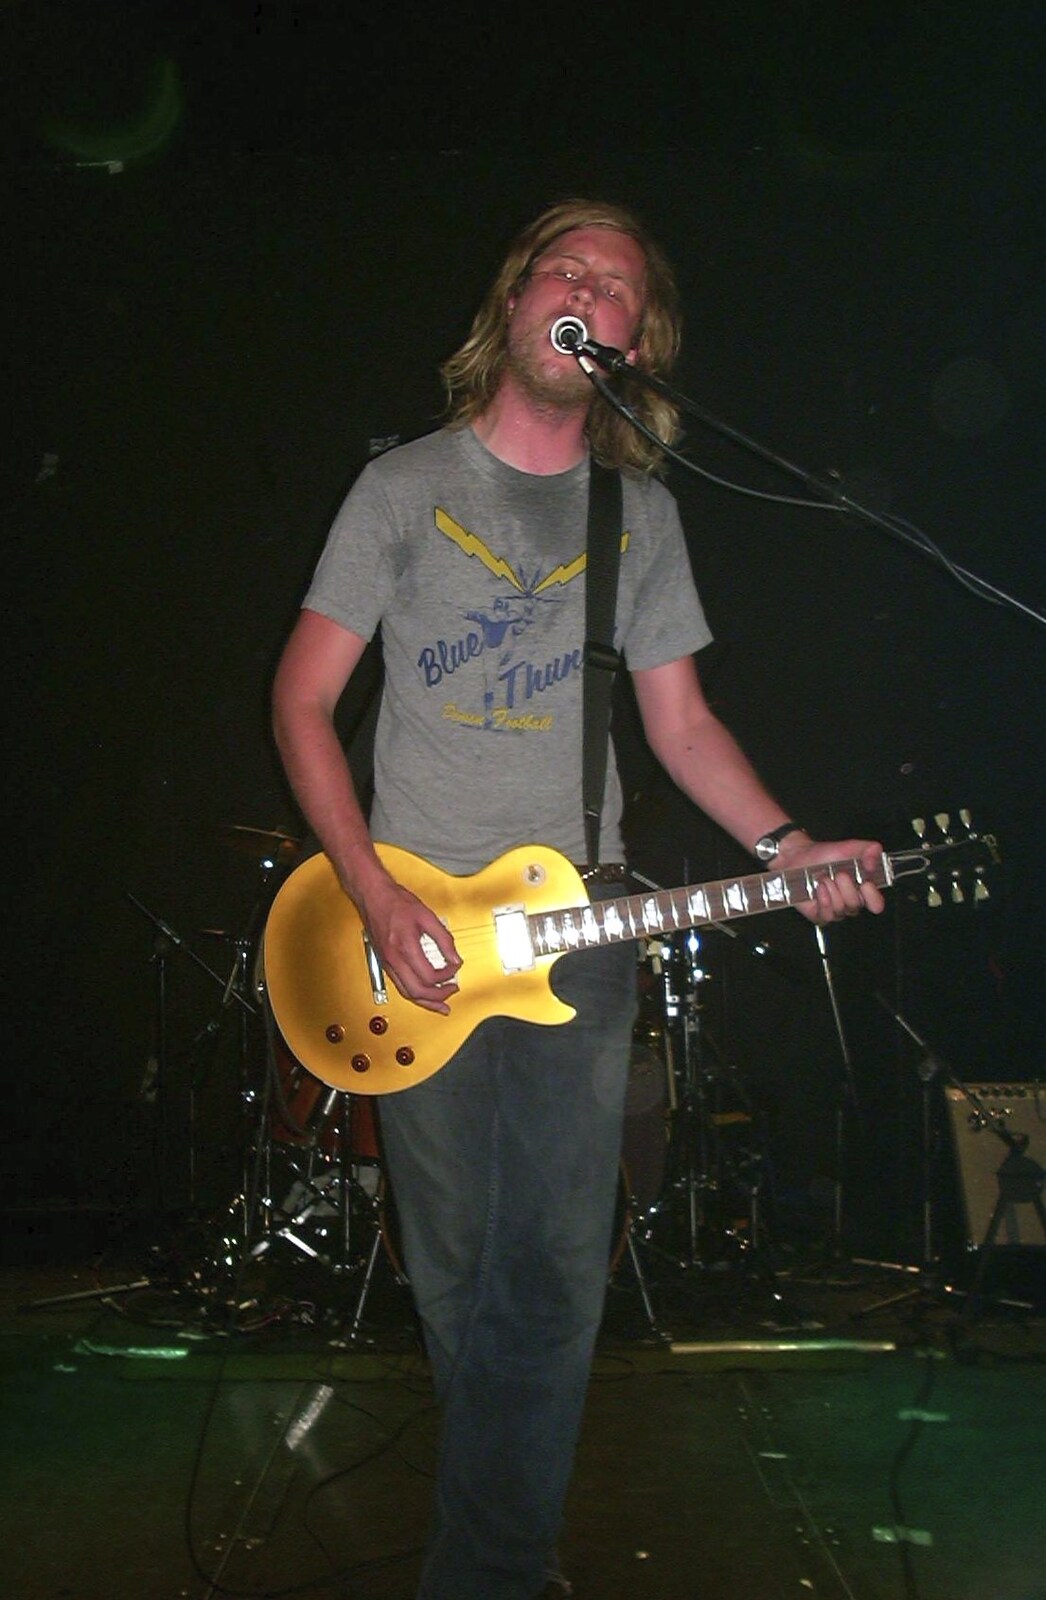 Longview and The BBs, Norwich and Banham, Norfolk - 4th July 2003: A sunburst Gibson Les Paul